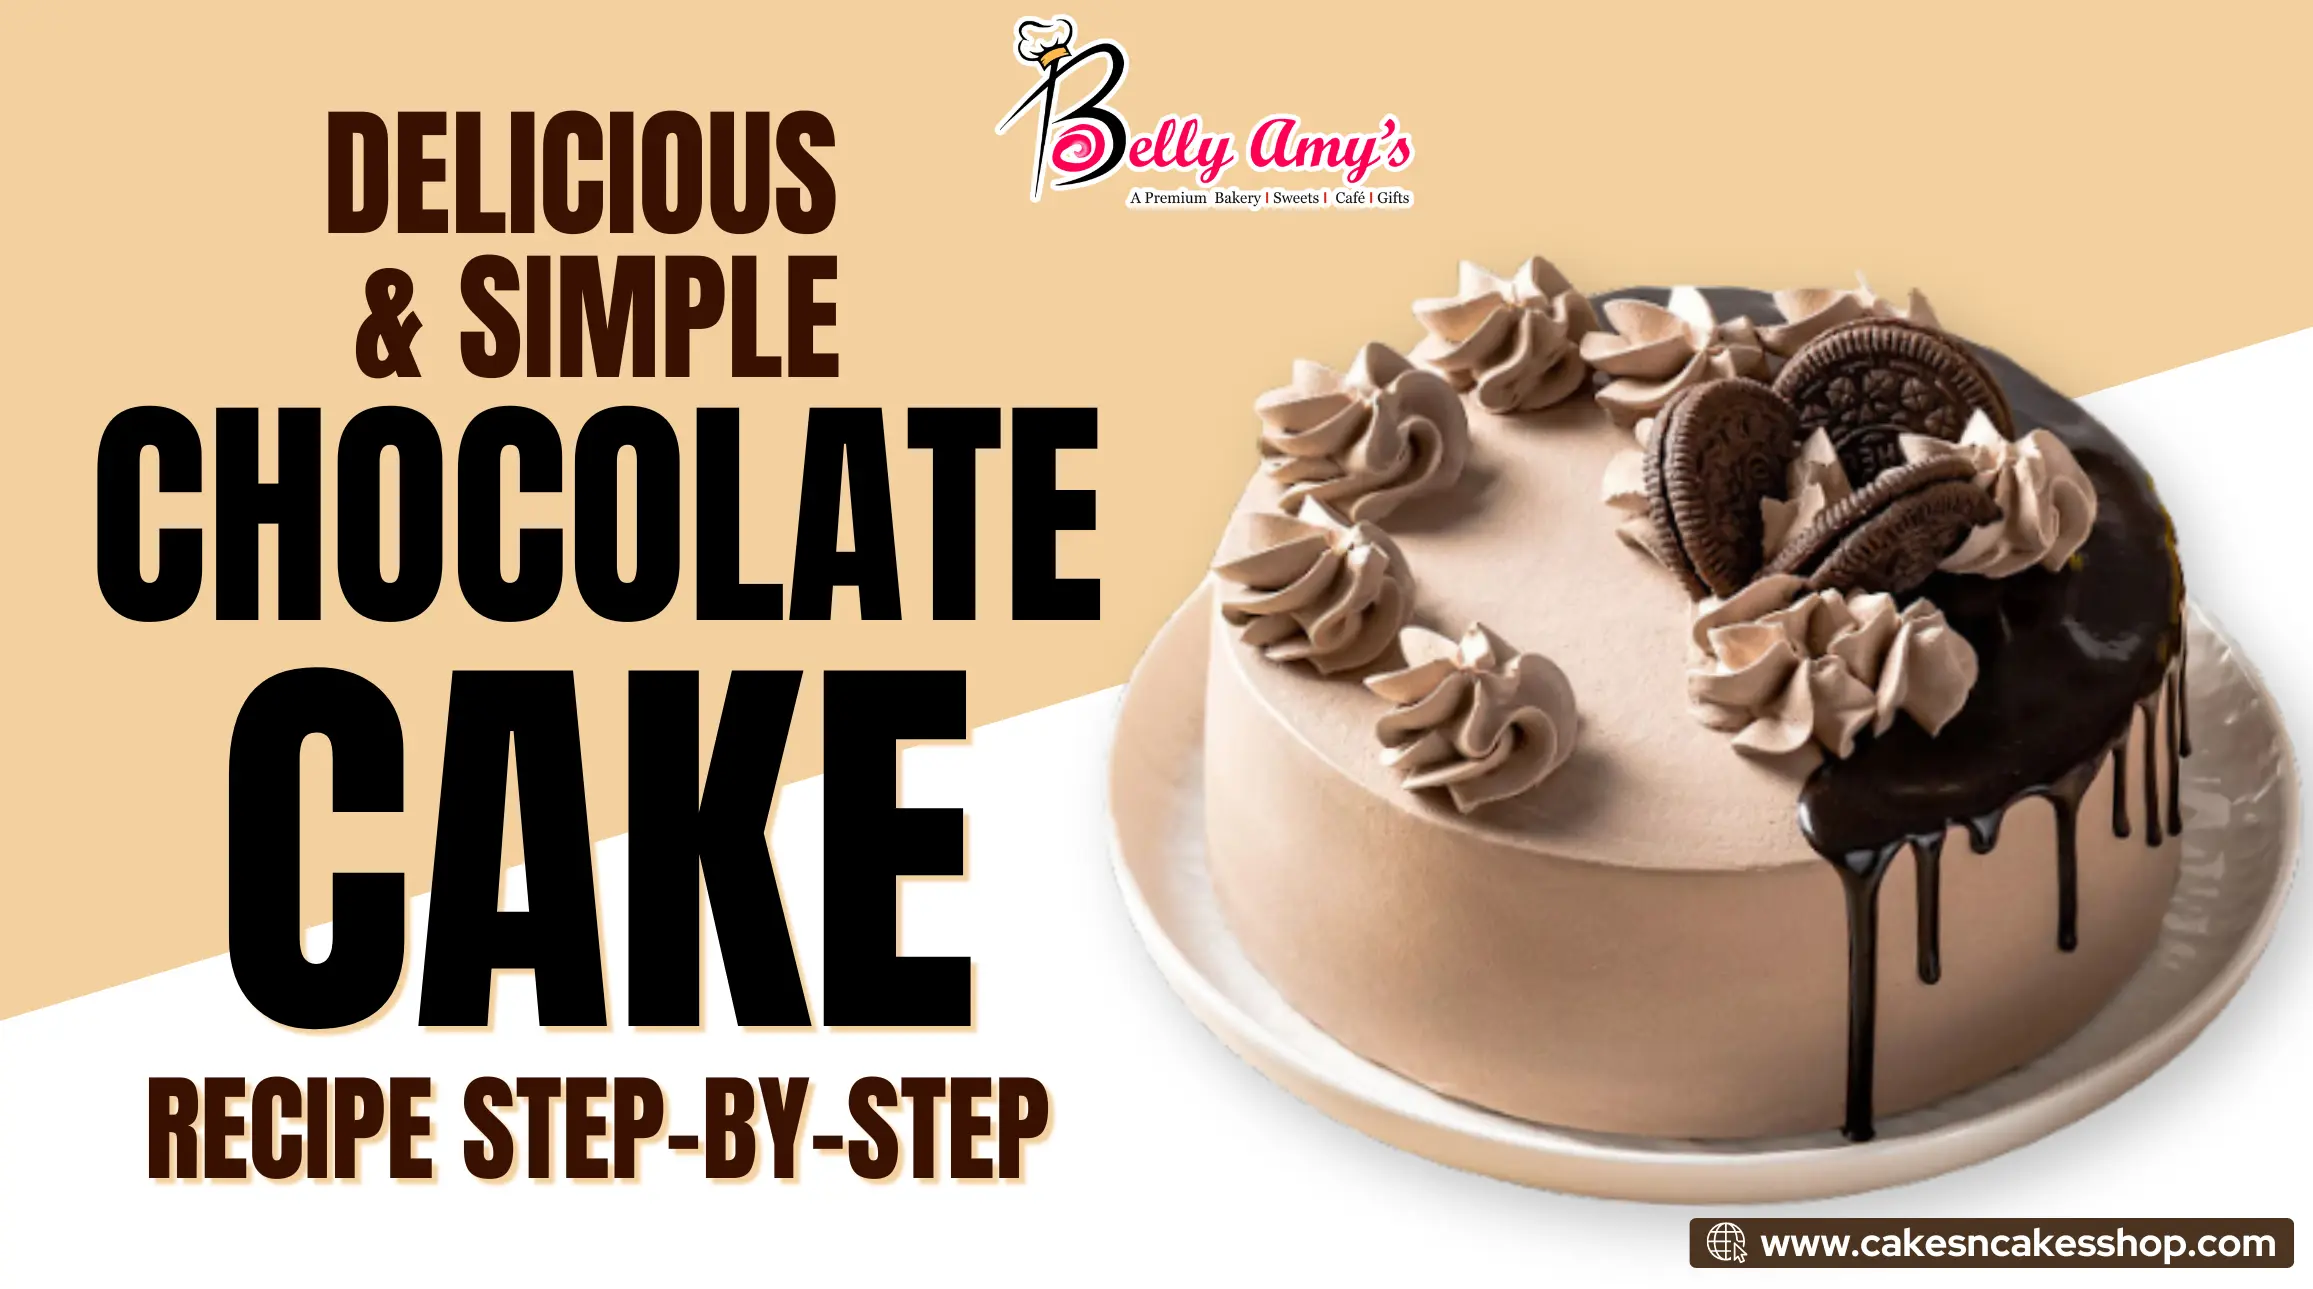 Delicious & Simple Chocolate Cake Recipe Step-By-Step